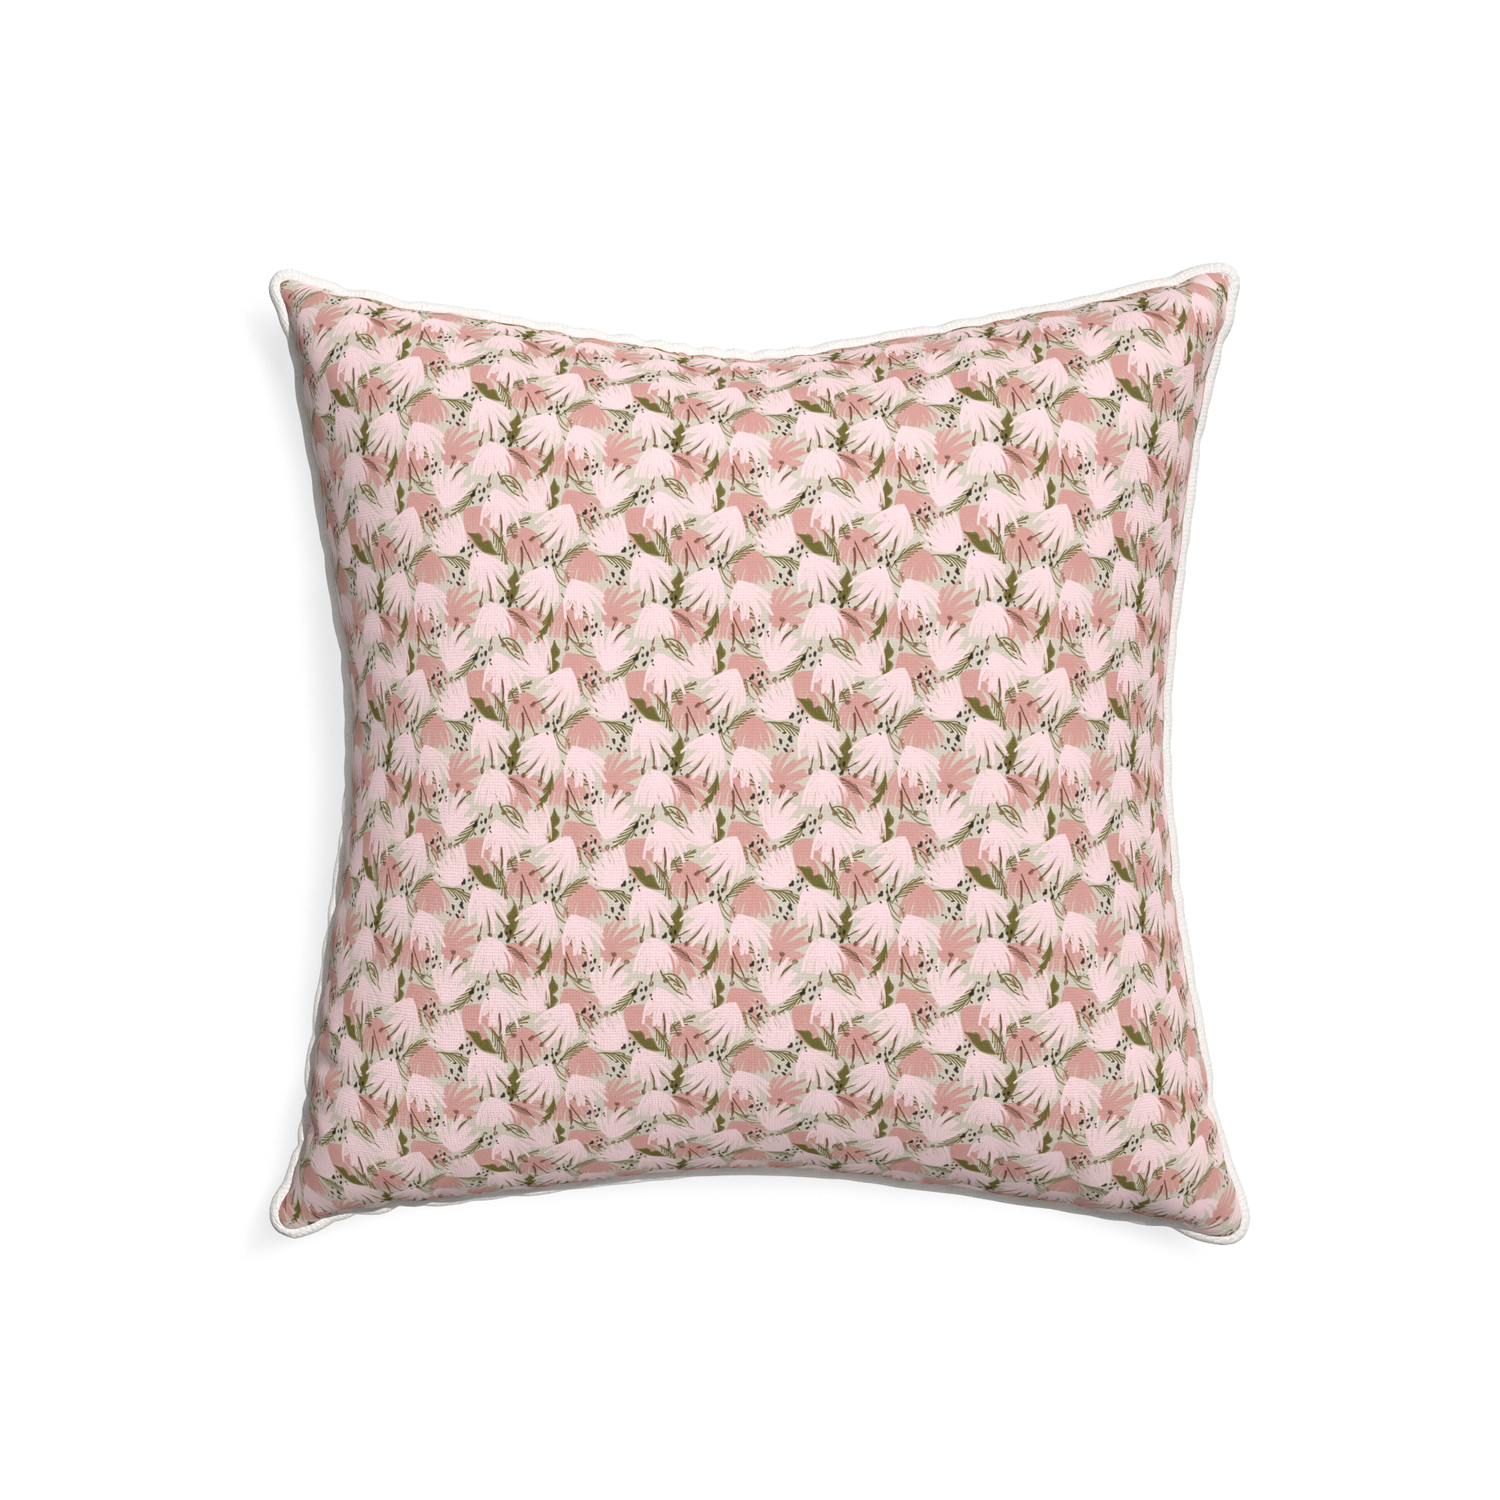 22-square eden pink custom pink floralpillow with snow piping on white background